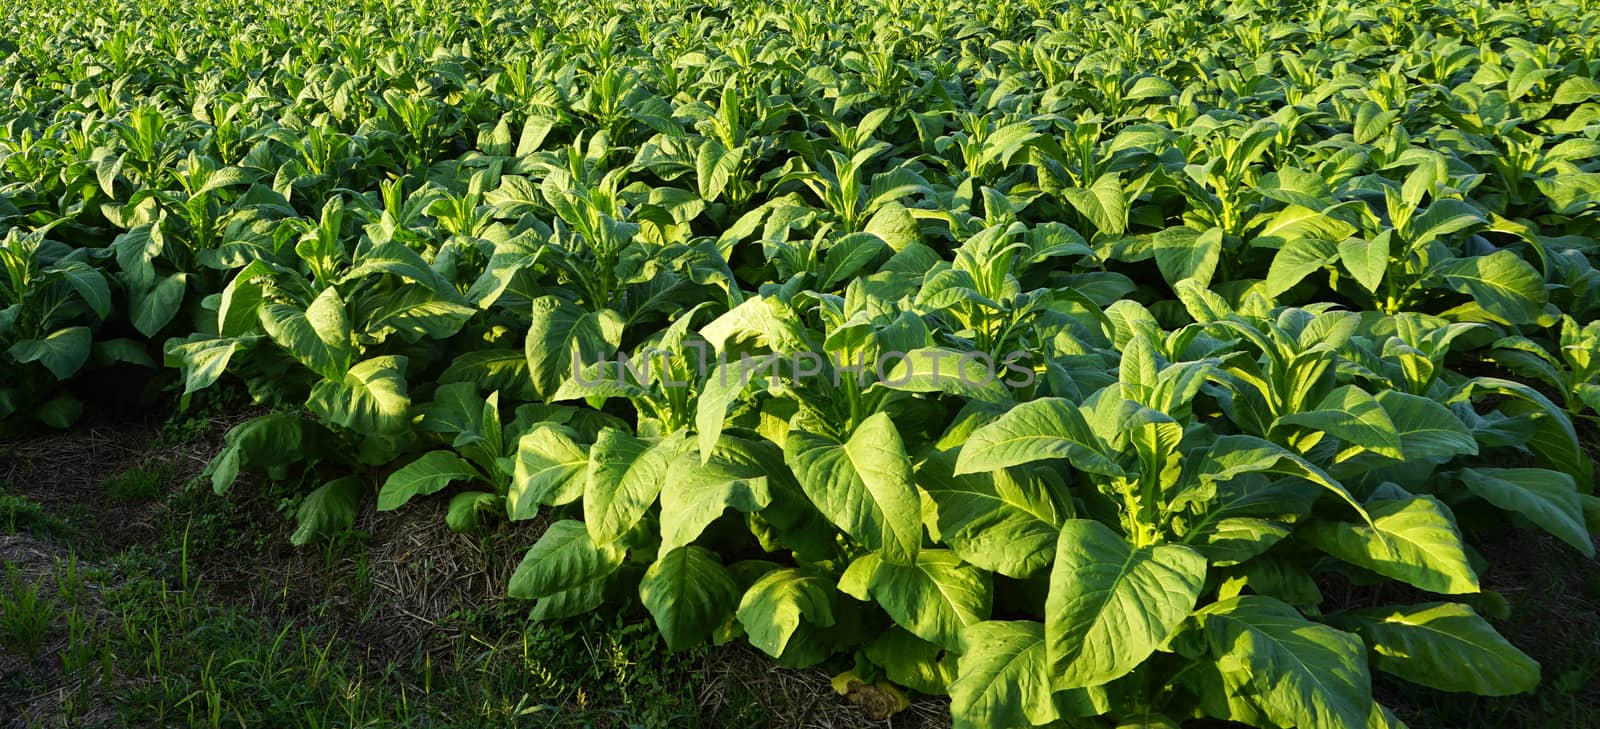 Tobacco farm agriculture harvest horizontal in thailand, asia